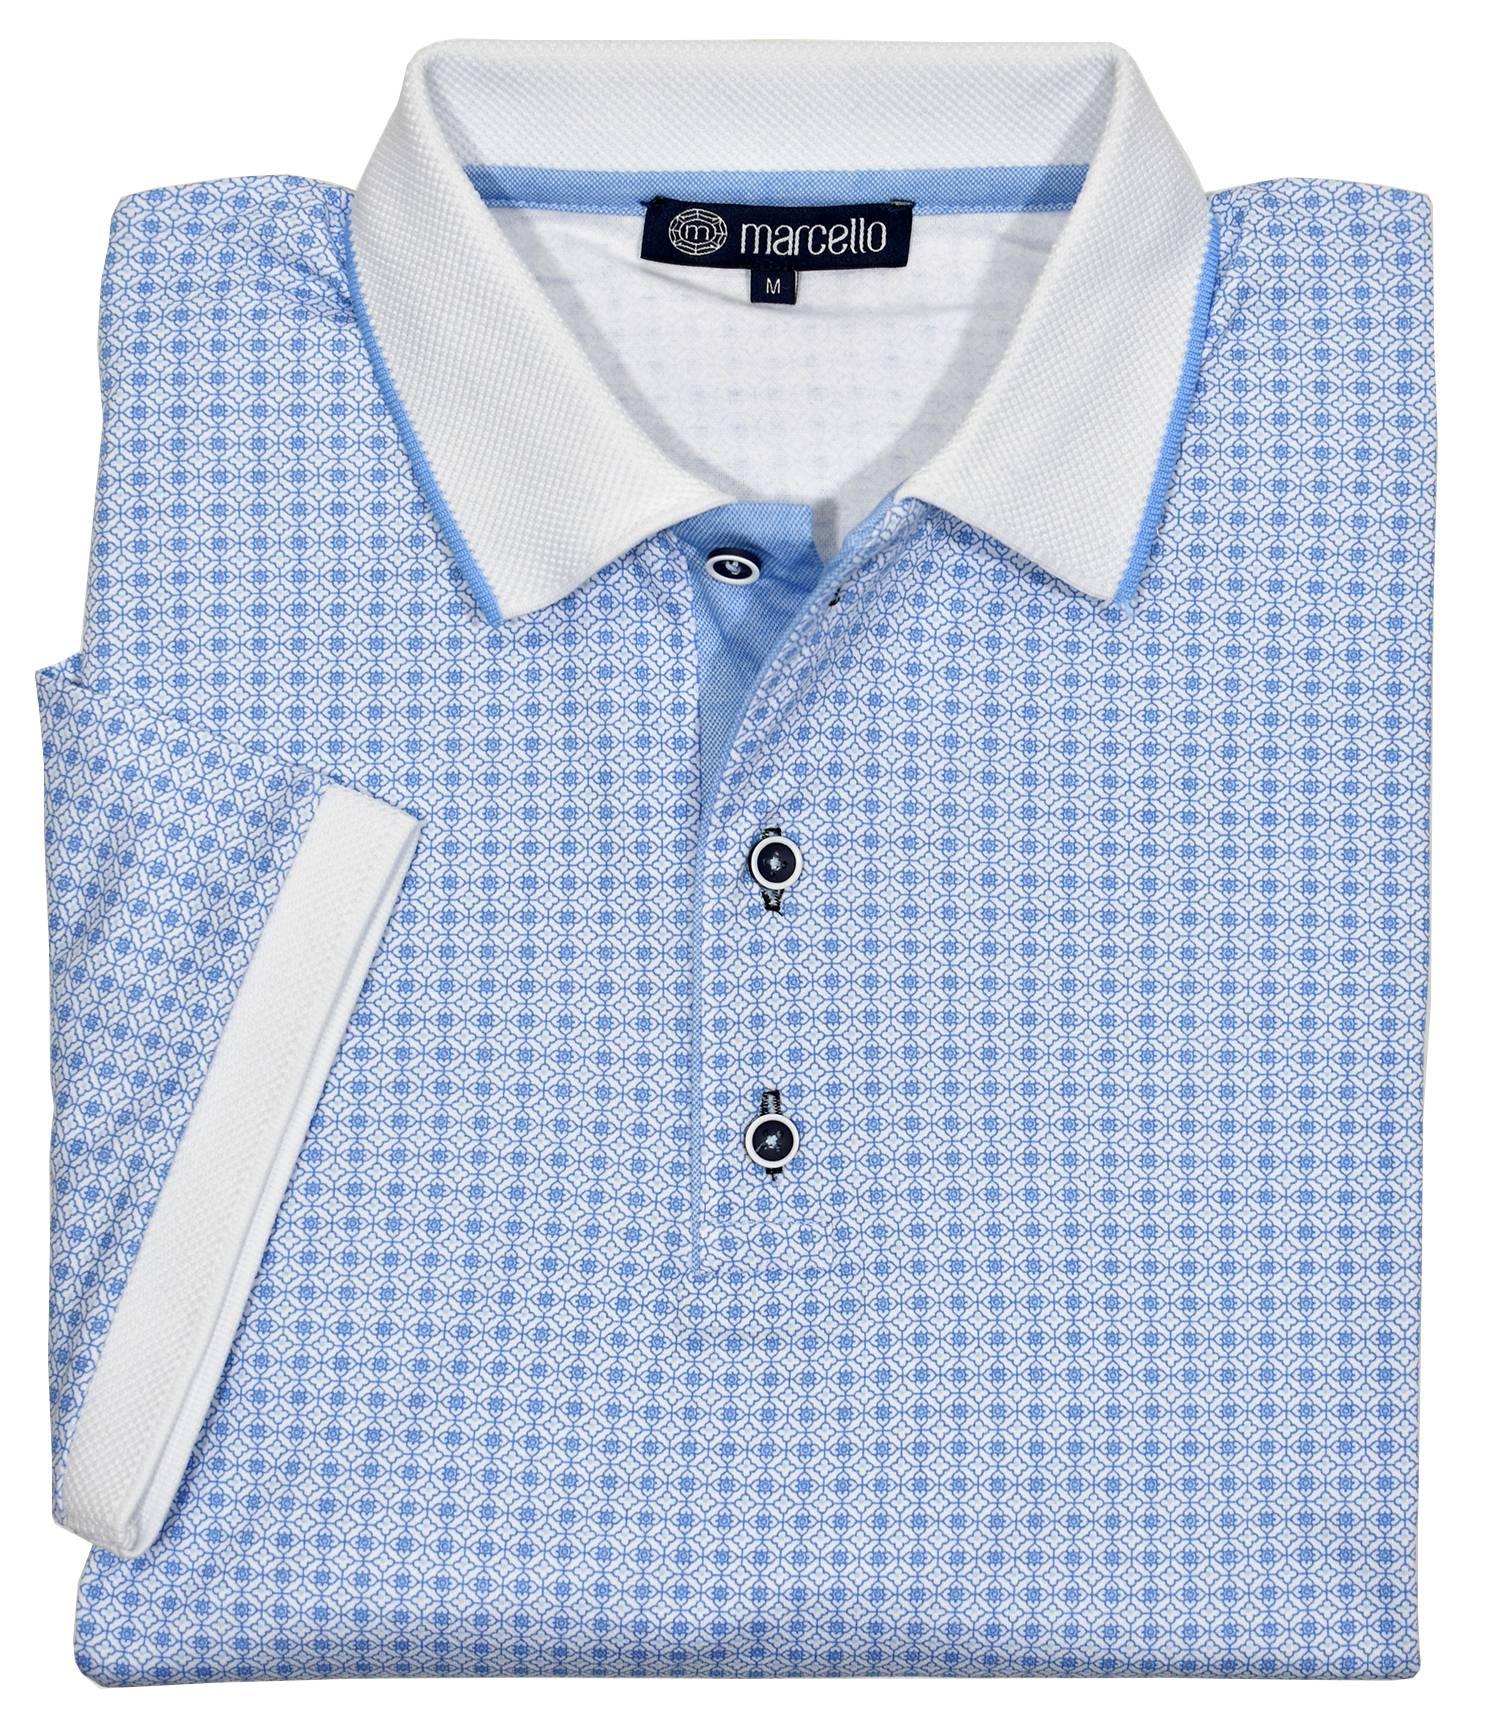 Ultra soft mercerized cotton is the ultimate in comfort and style.  Ultimate cotton fabric. Updated traditional printed pattern. Trend collar with contrast detailing. Custom buttons. Modern fit. Polo by Marcello Sport